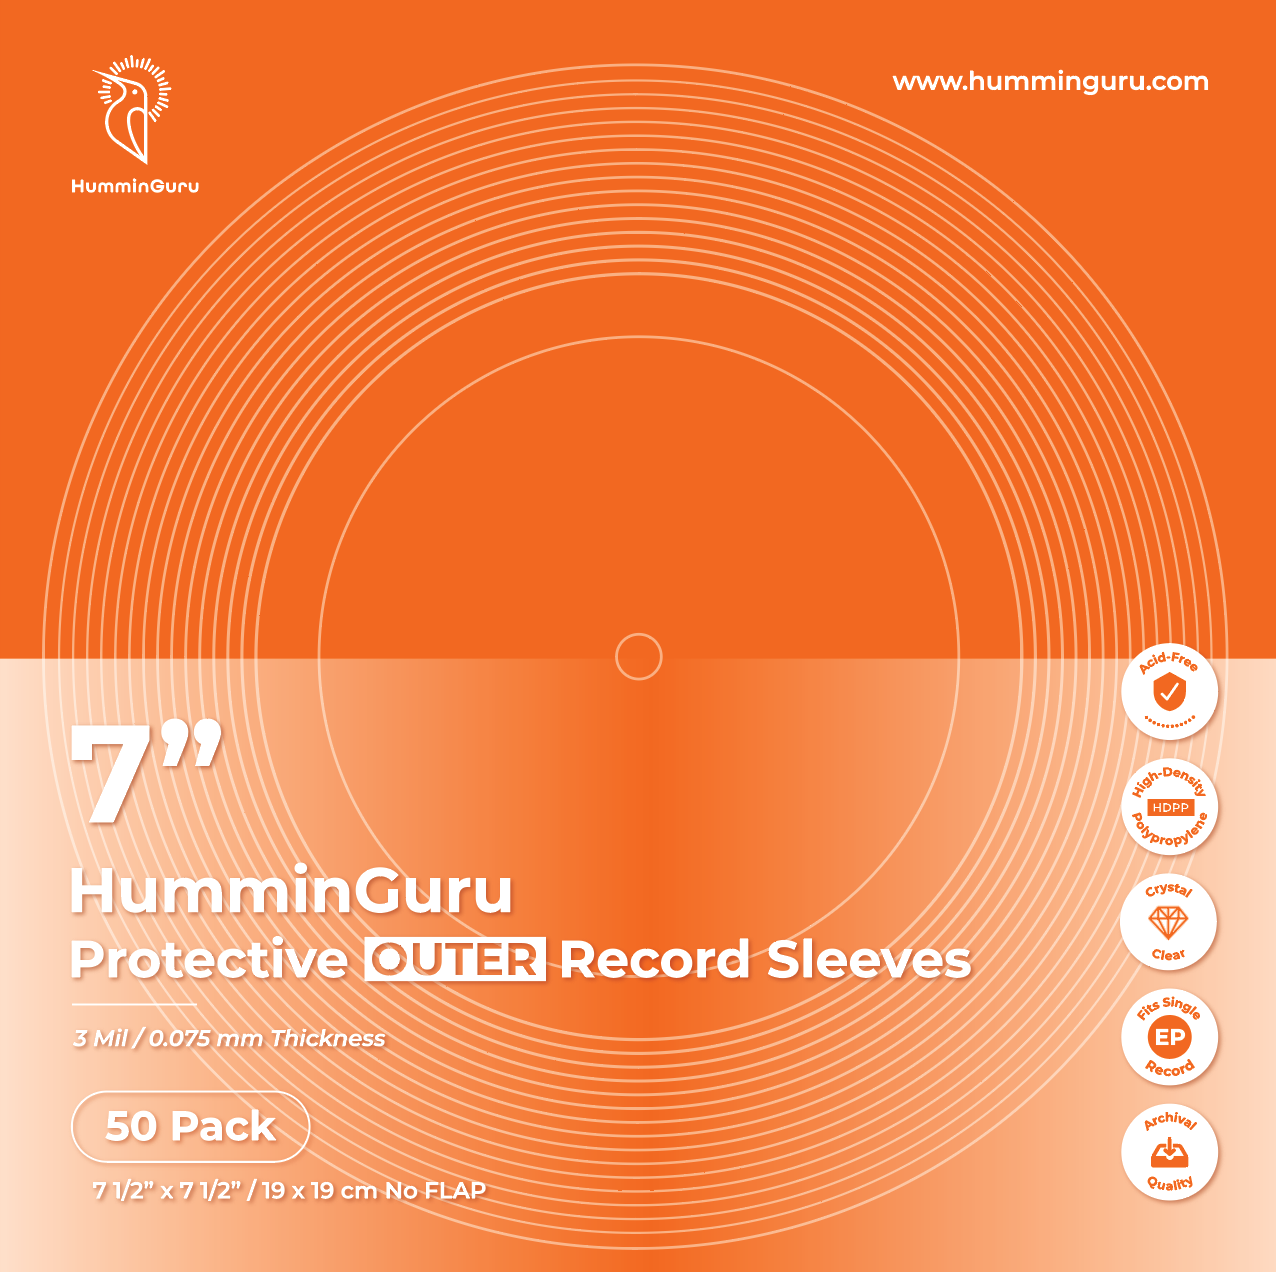 HumminGuru 7" Protective Outer Record Sleeves (50 Pack)